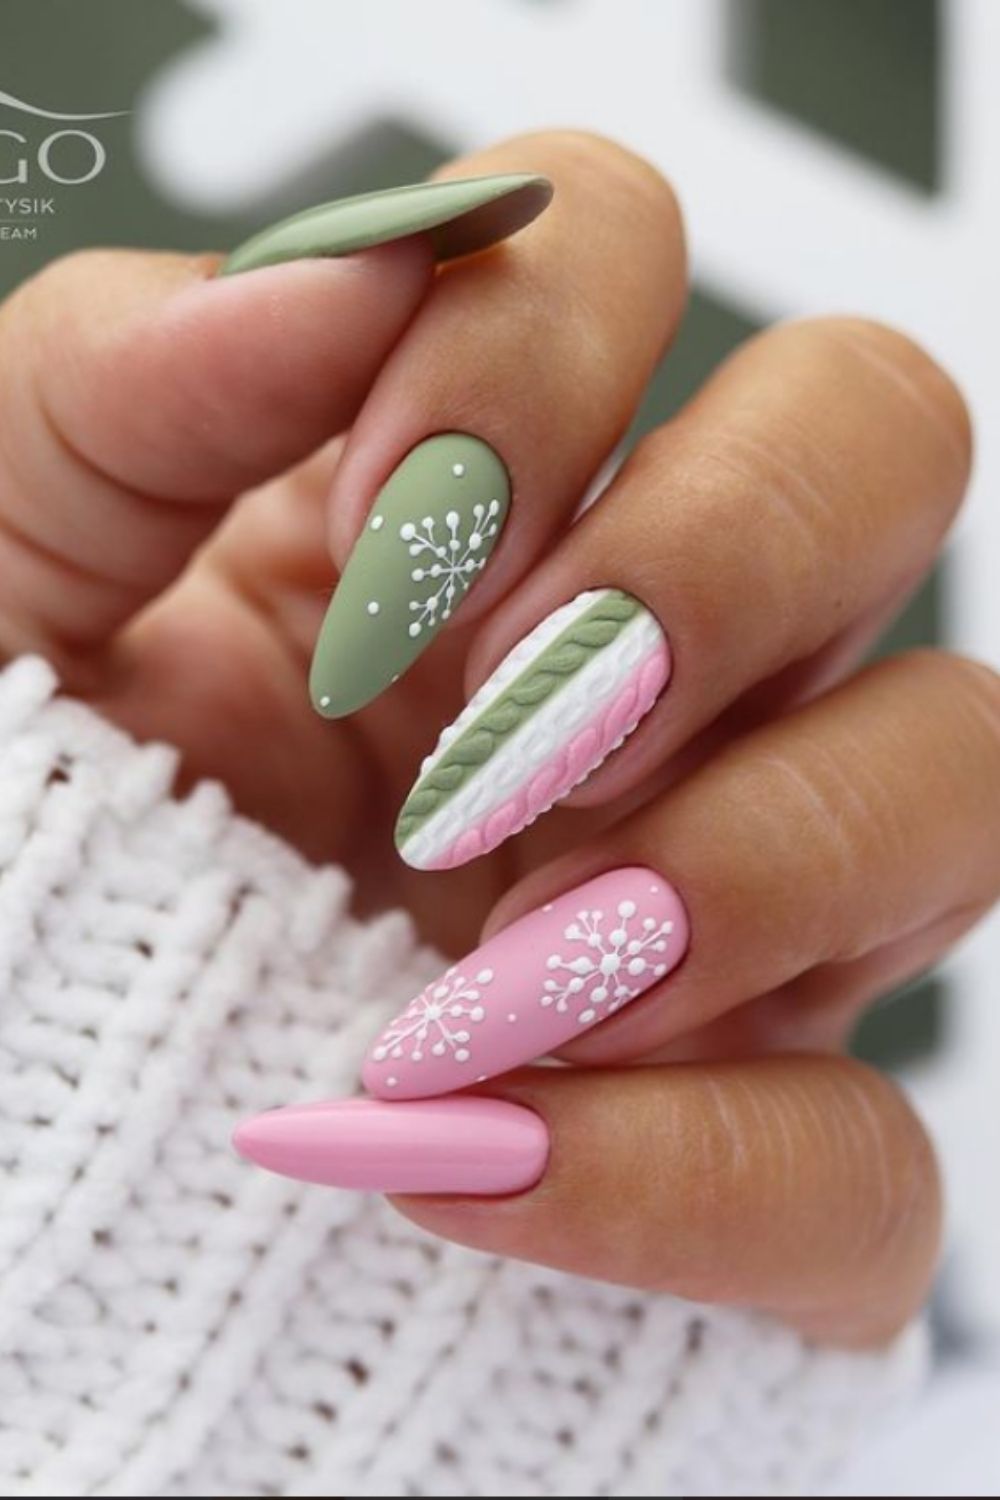 Green and white almond nails